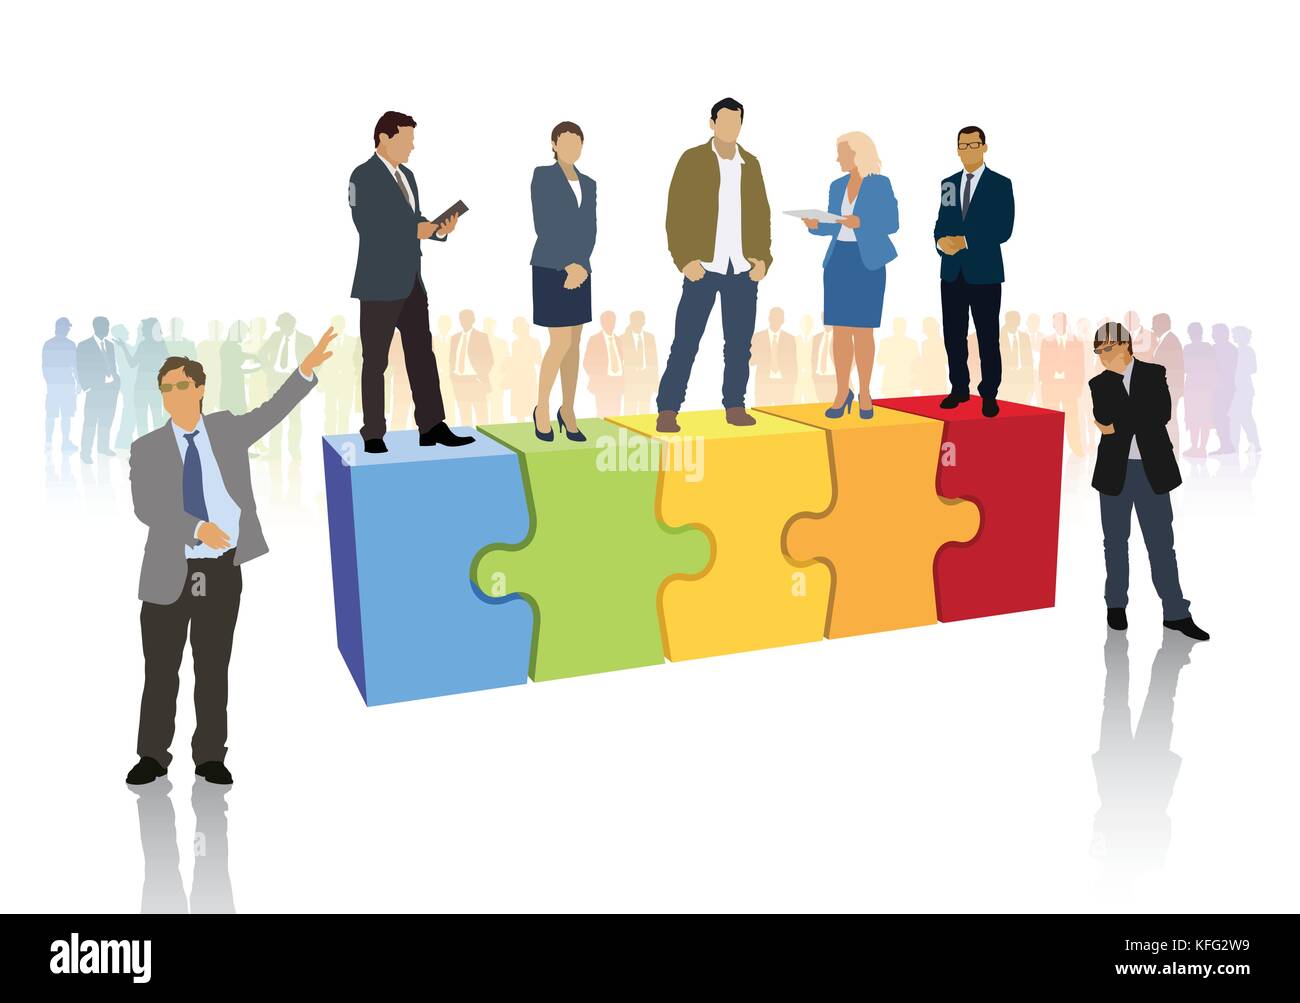 Successful business team is standing on pieces of jigsaw puzzle in front of large crowd of businesspeople. Stock Vector